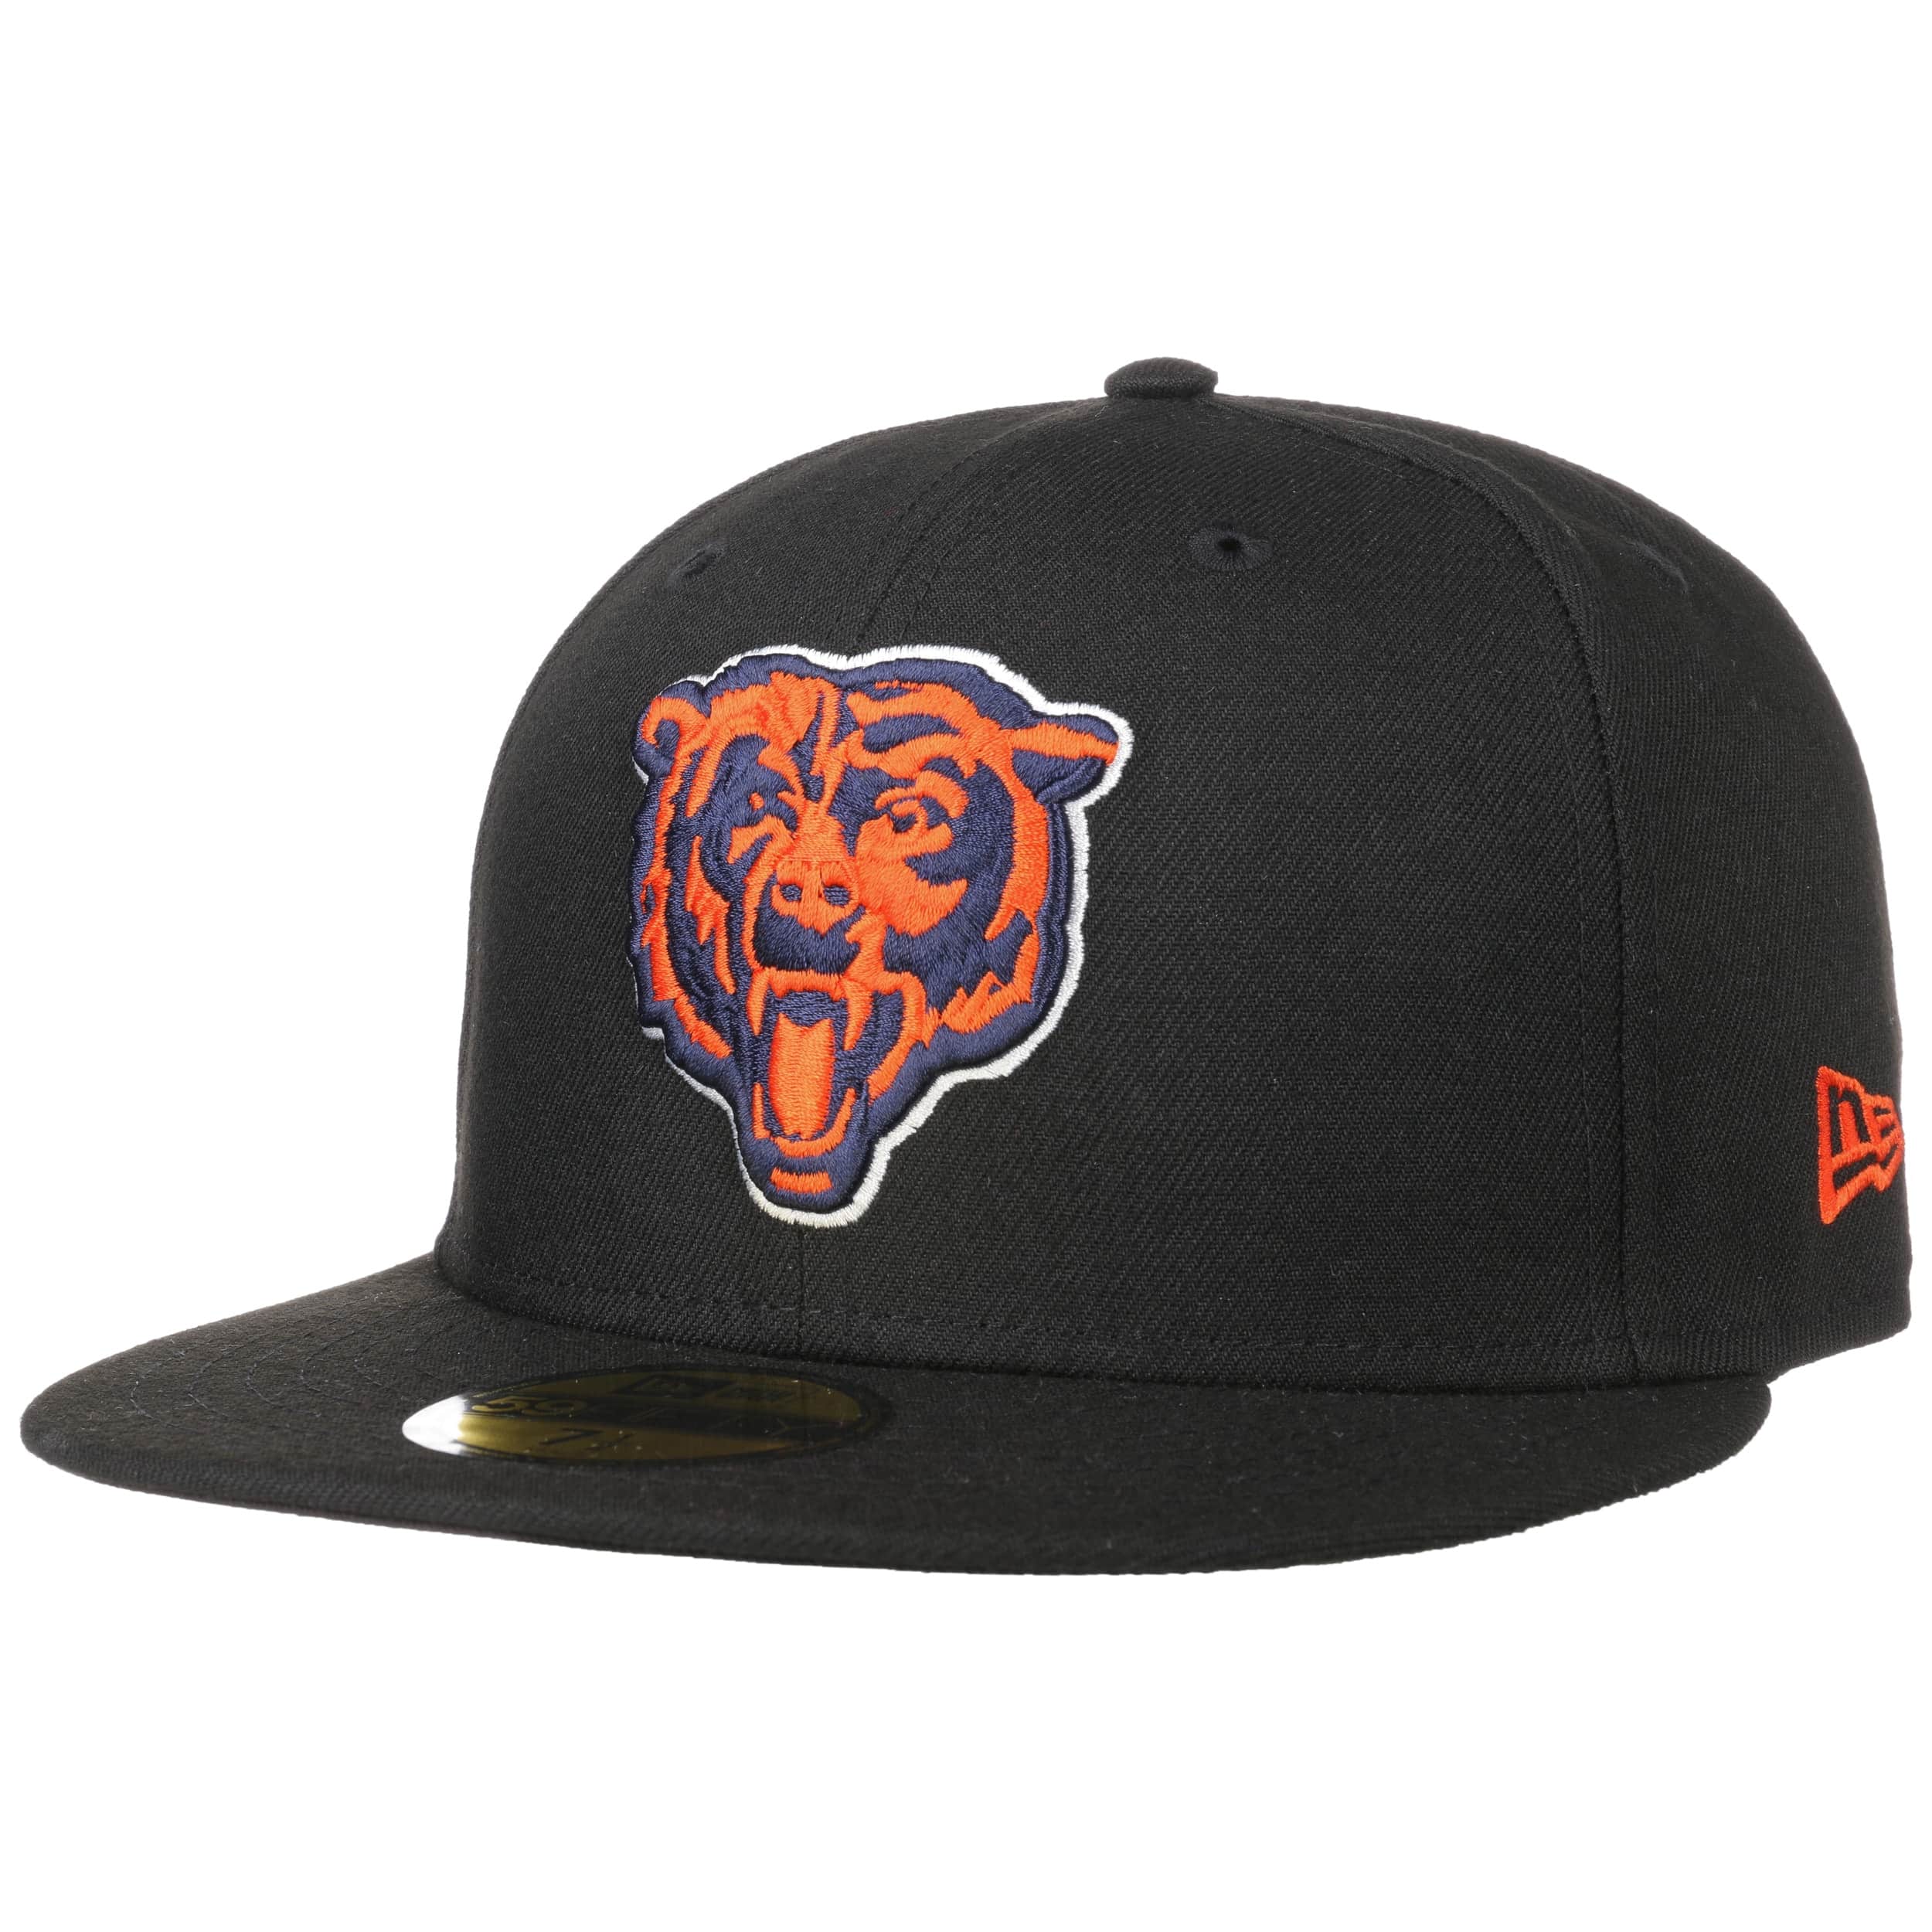 59Fifty Exclusive Chicago Bears Cap by 